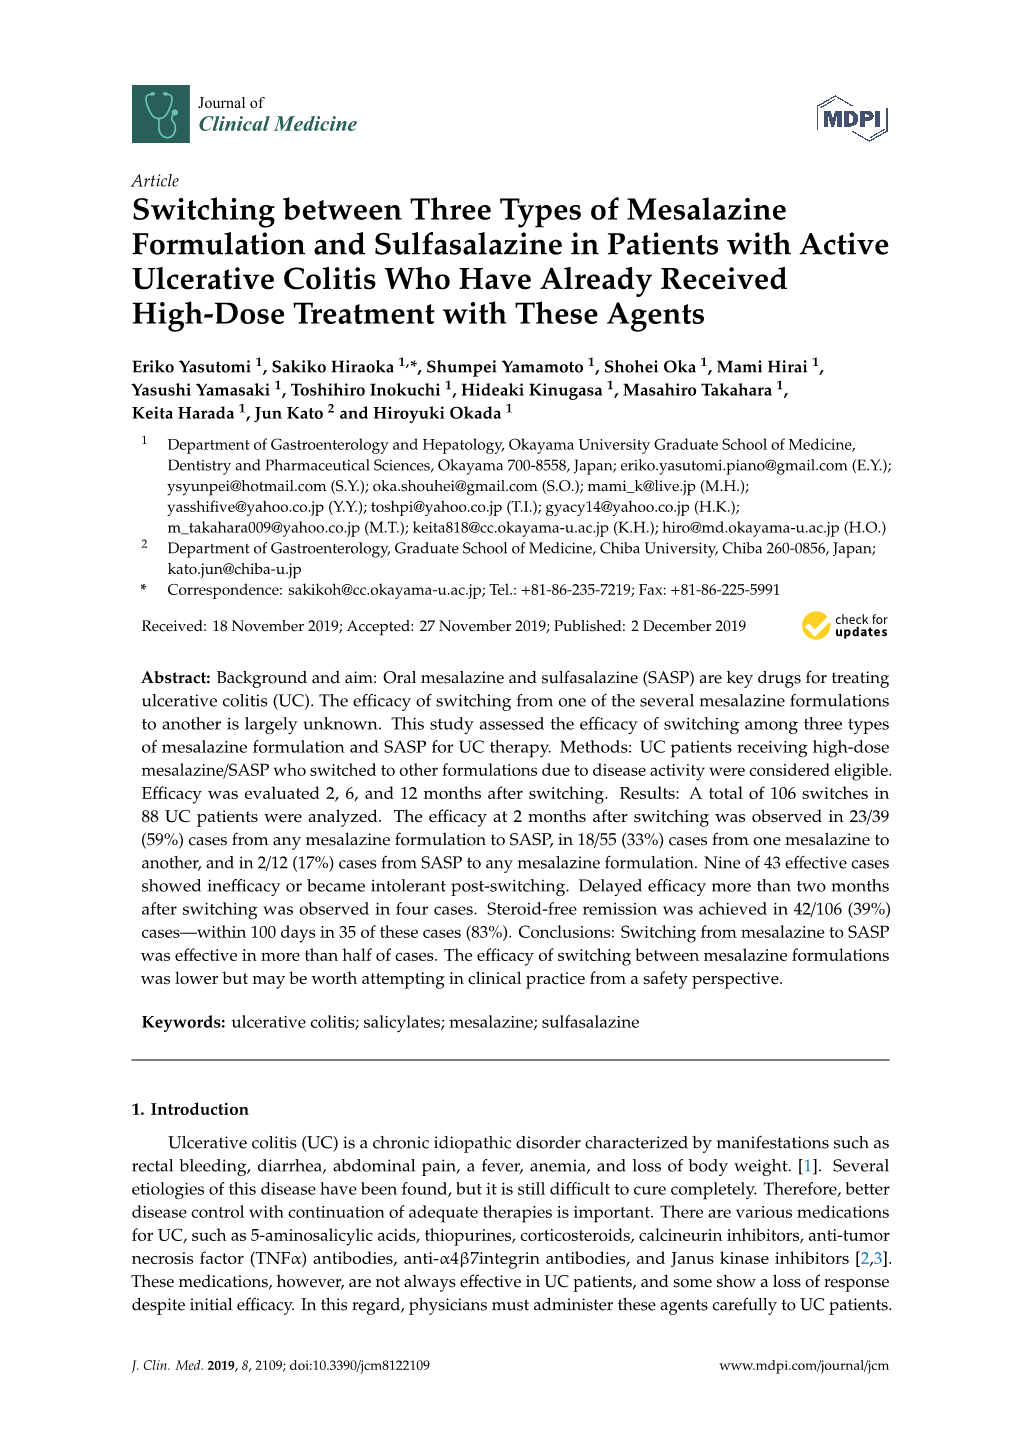 Switching Between Three Types of Mesalazine Formulation and Sulfasalazine in Patients with Active Ulcerative Colitis Who Have Al